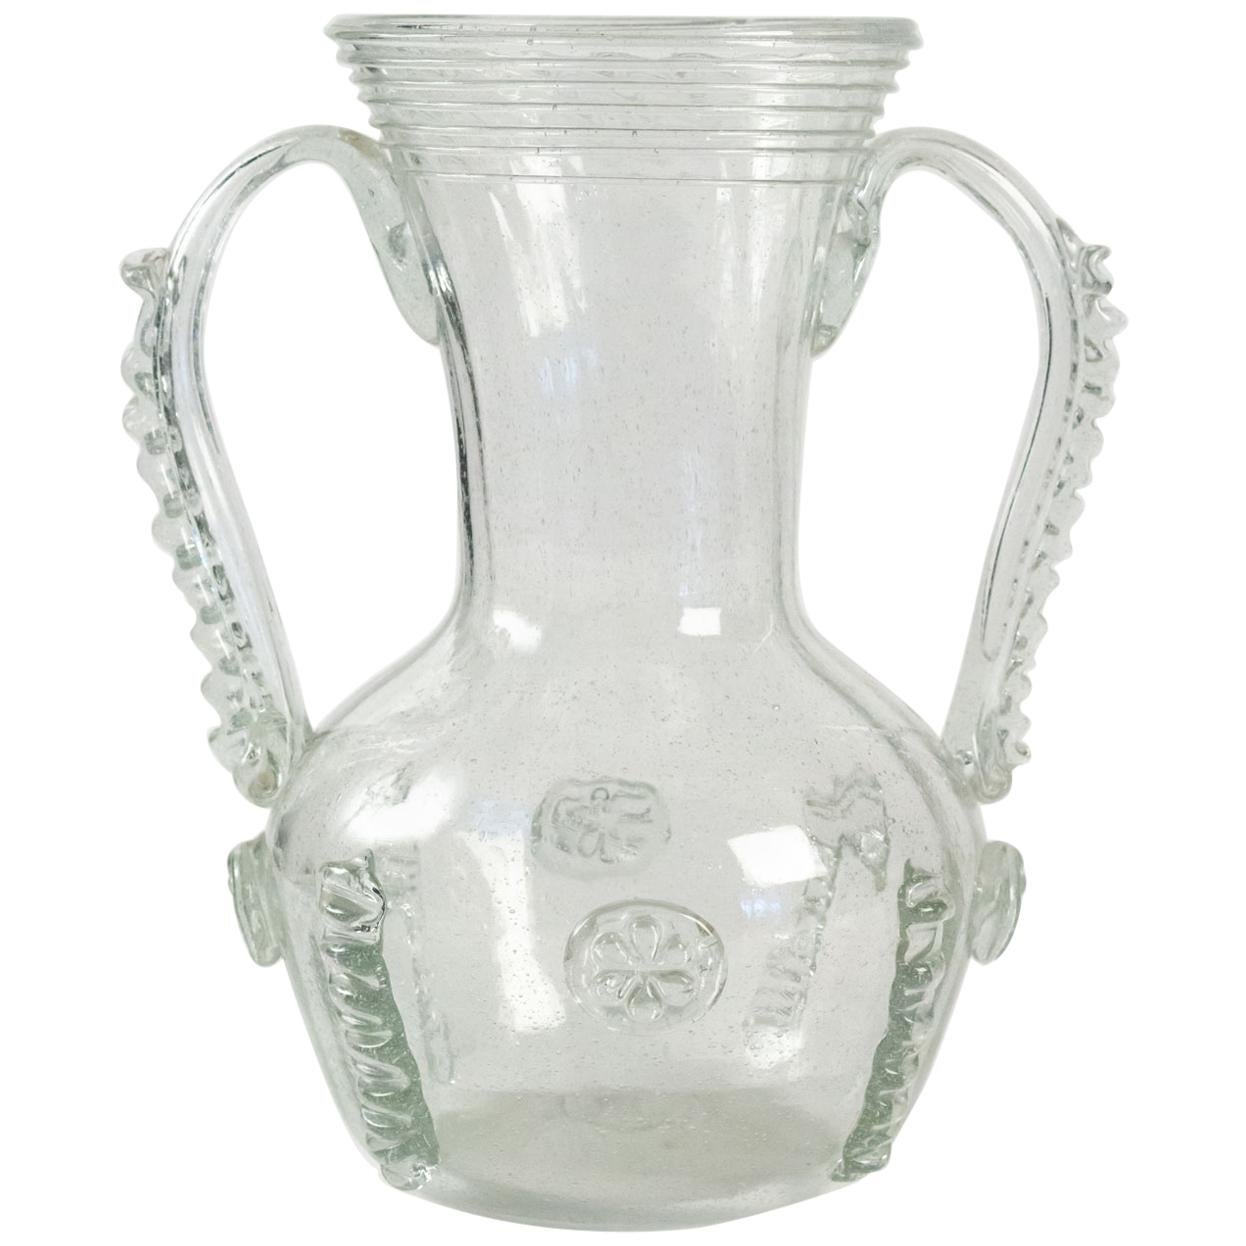 Glass Vase From Normandy, Rouen, France, 19th Century, Old Dishes